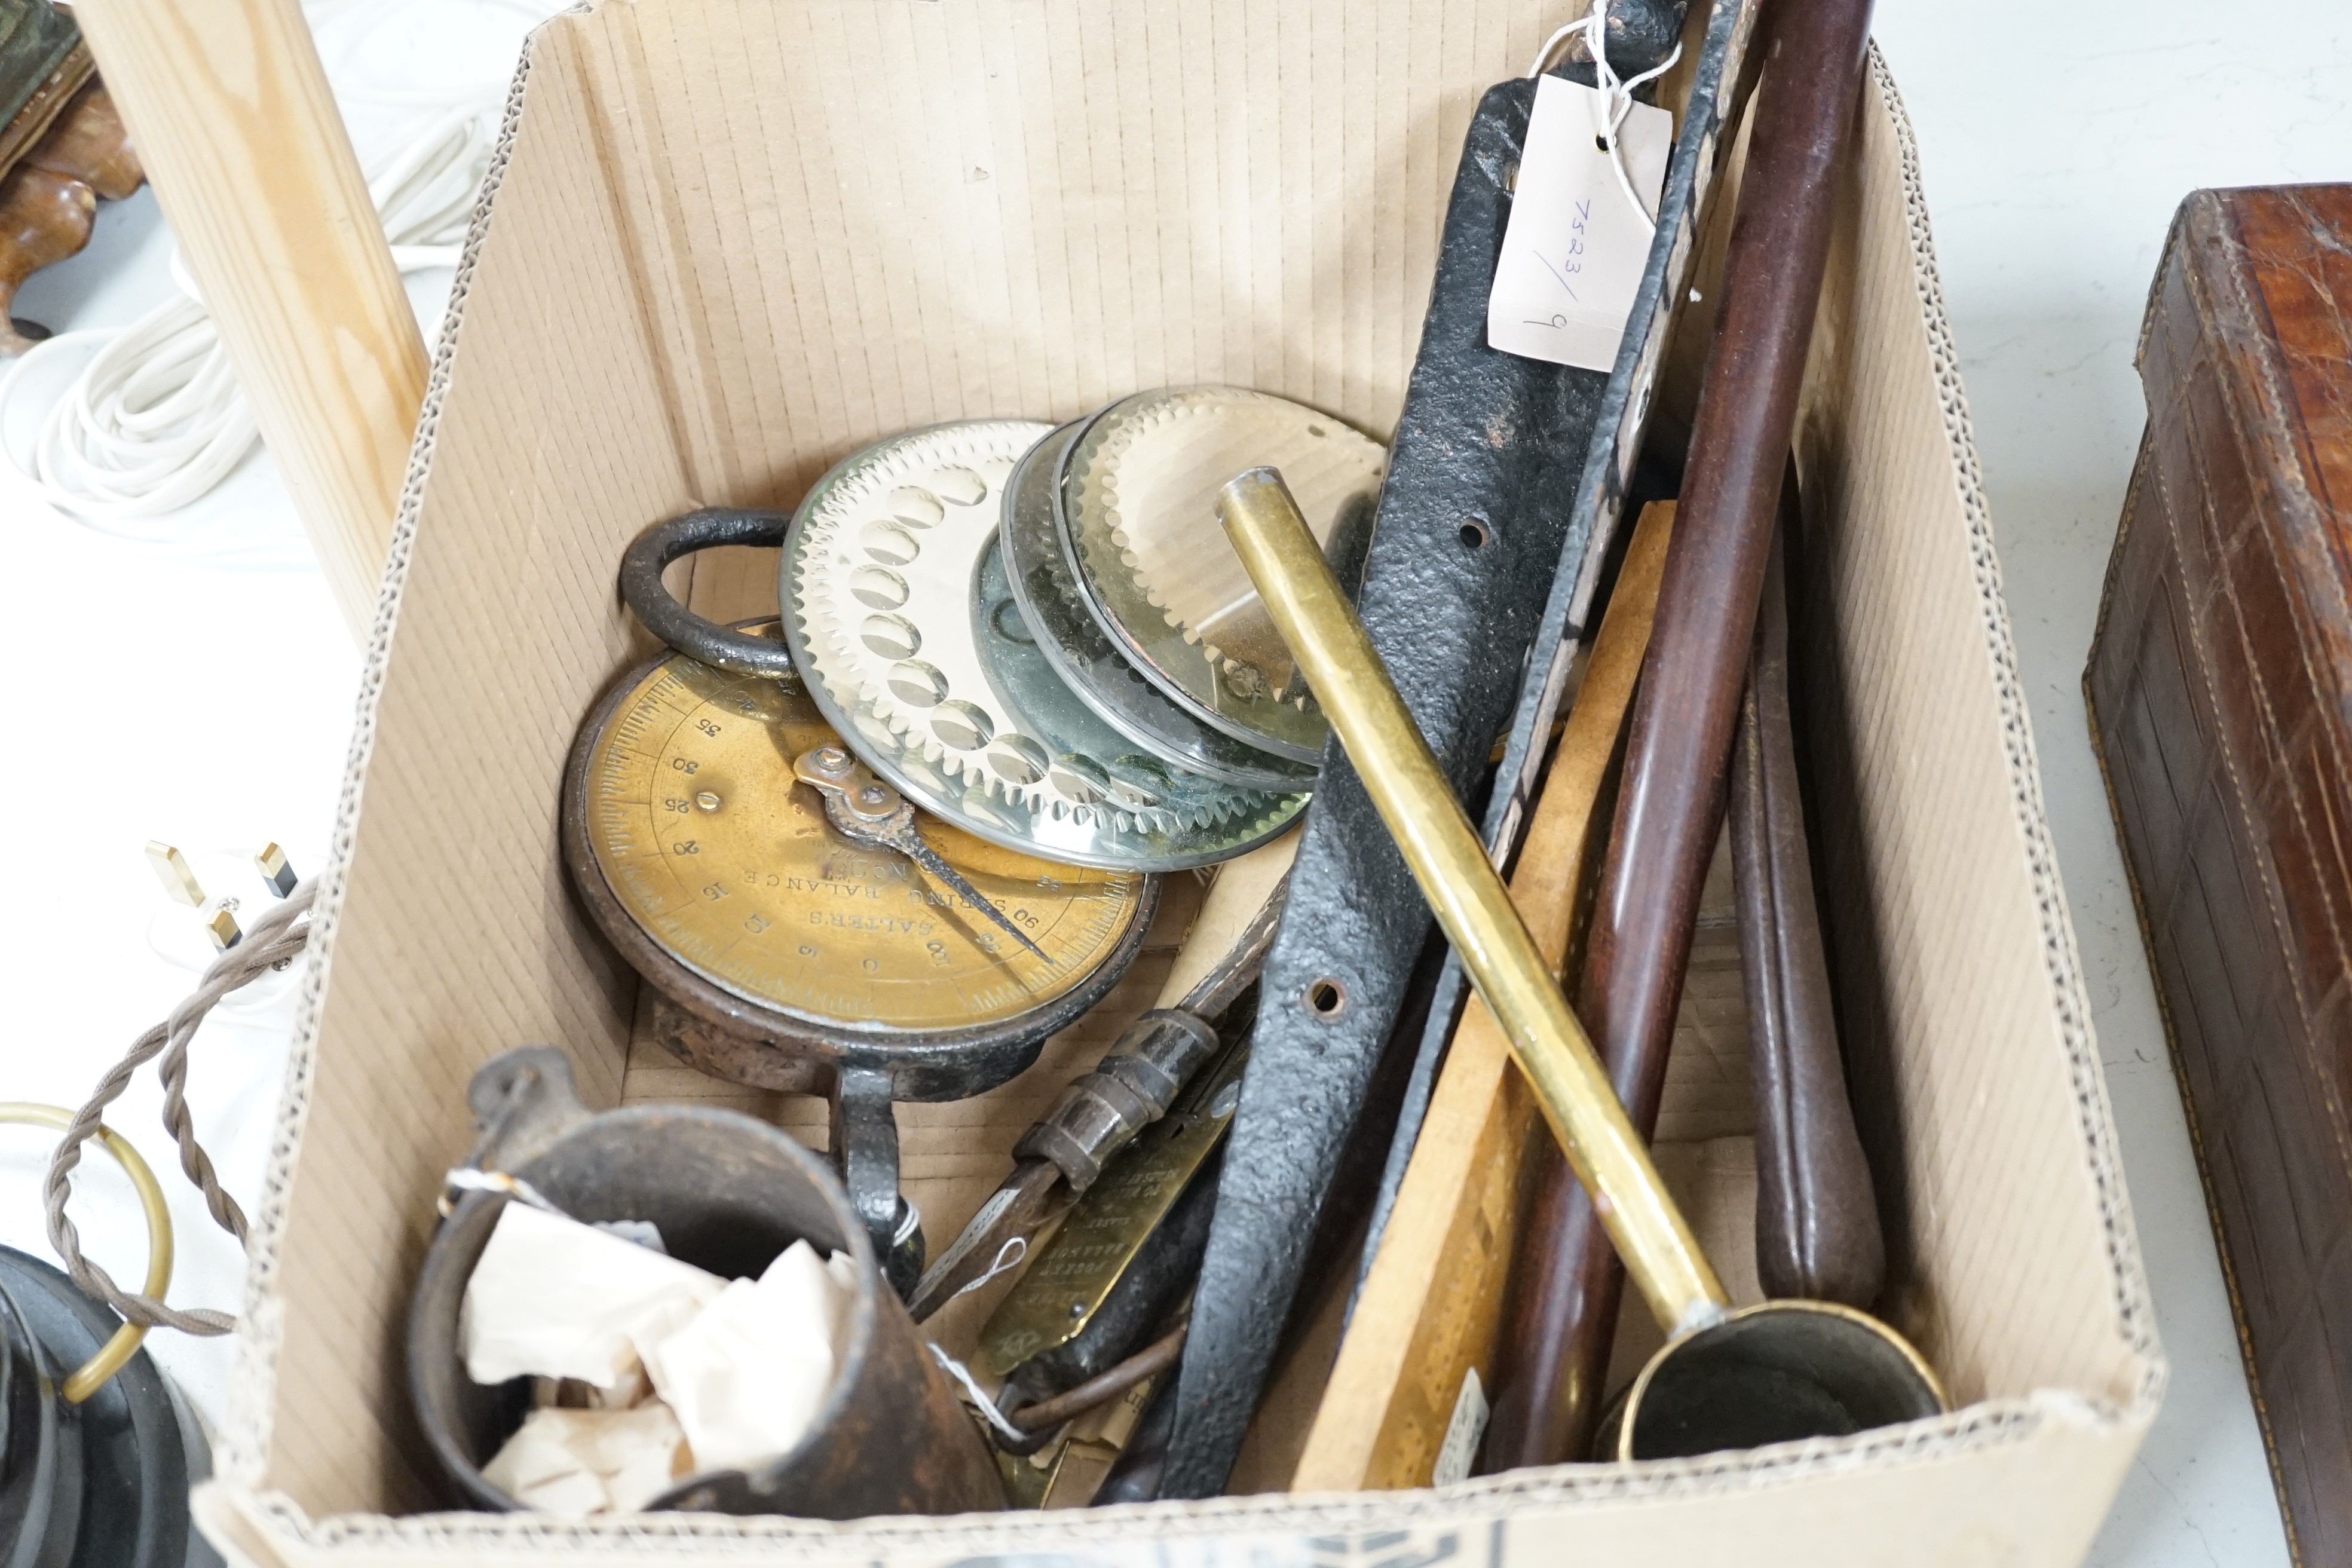 A quantity of collectables including handbags, scales, metal wares etc